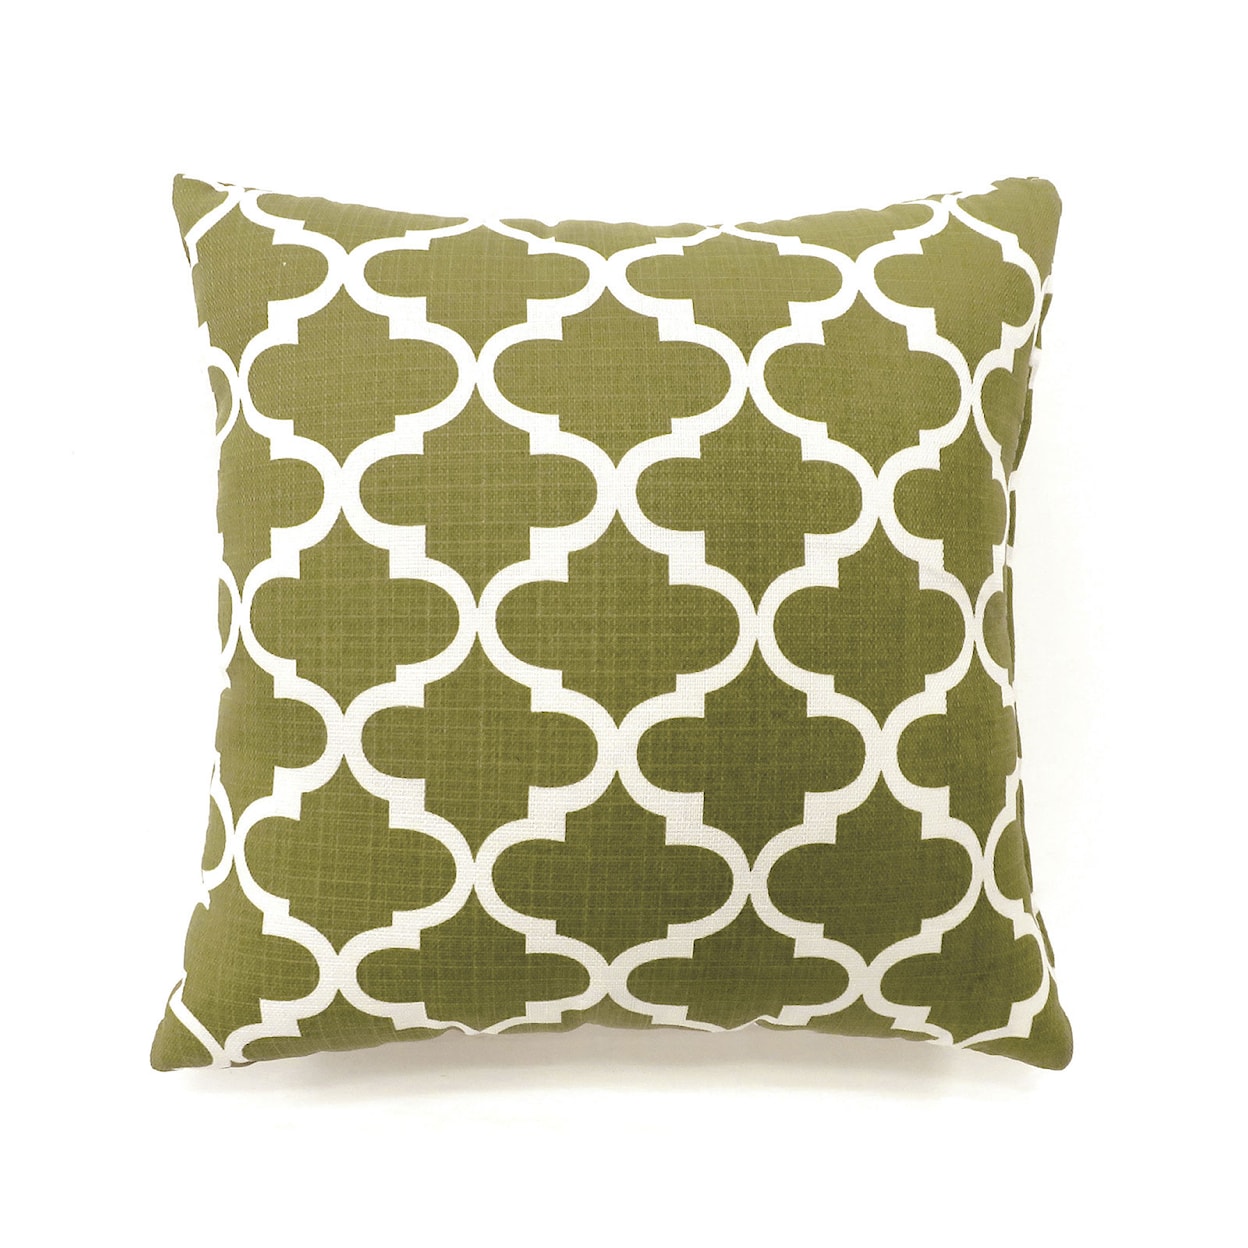 Furniture of America Xia Set of Two 22" X 22" Pillows, Green